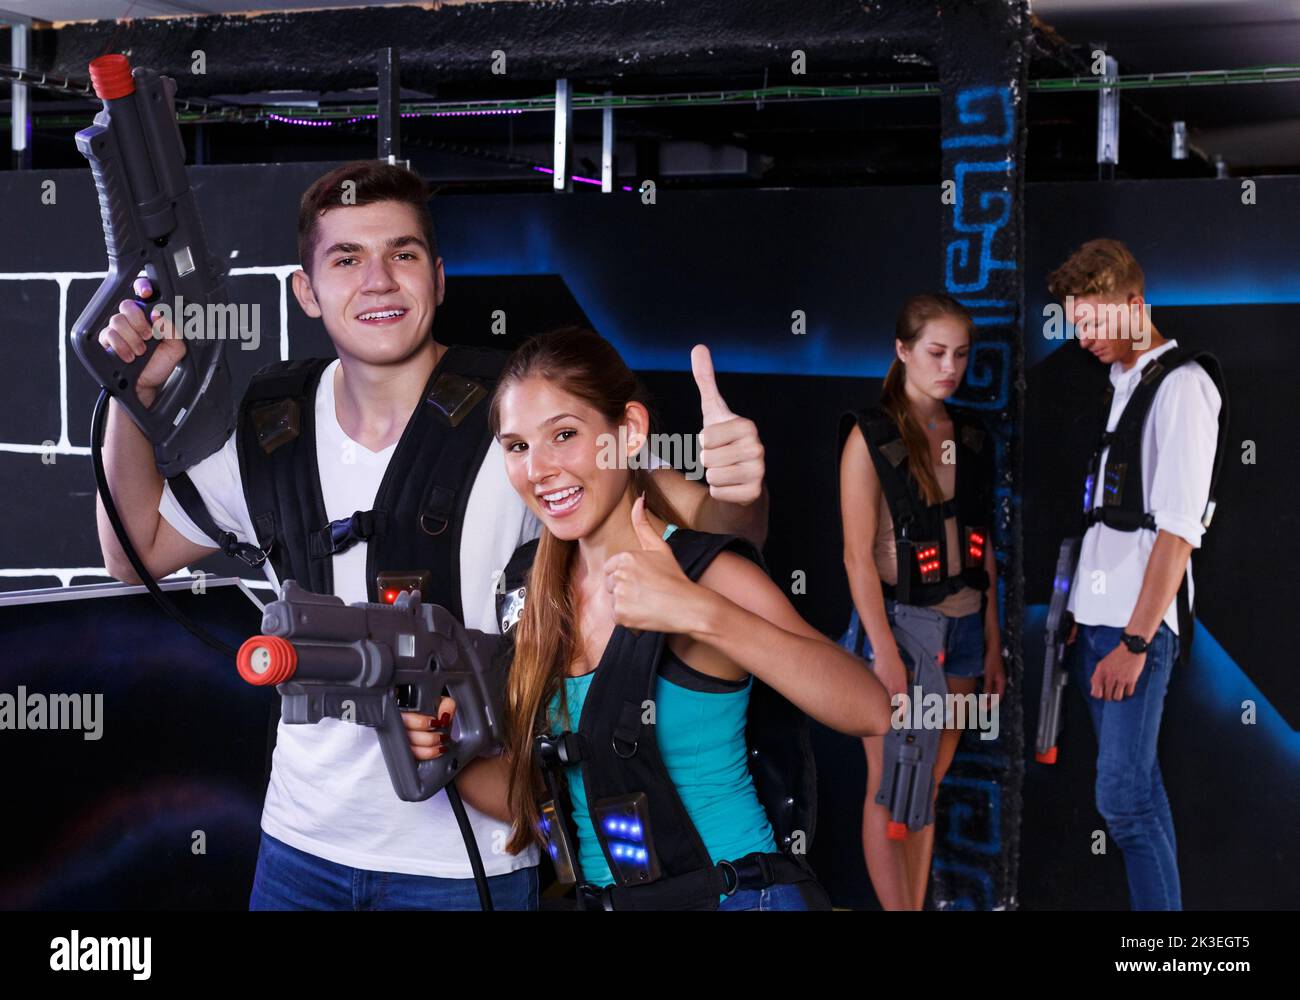 Guy and girl are happy with their victory in laser tag game Stock Photo